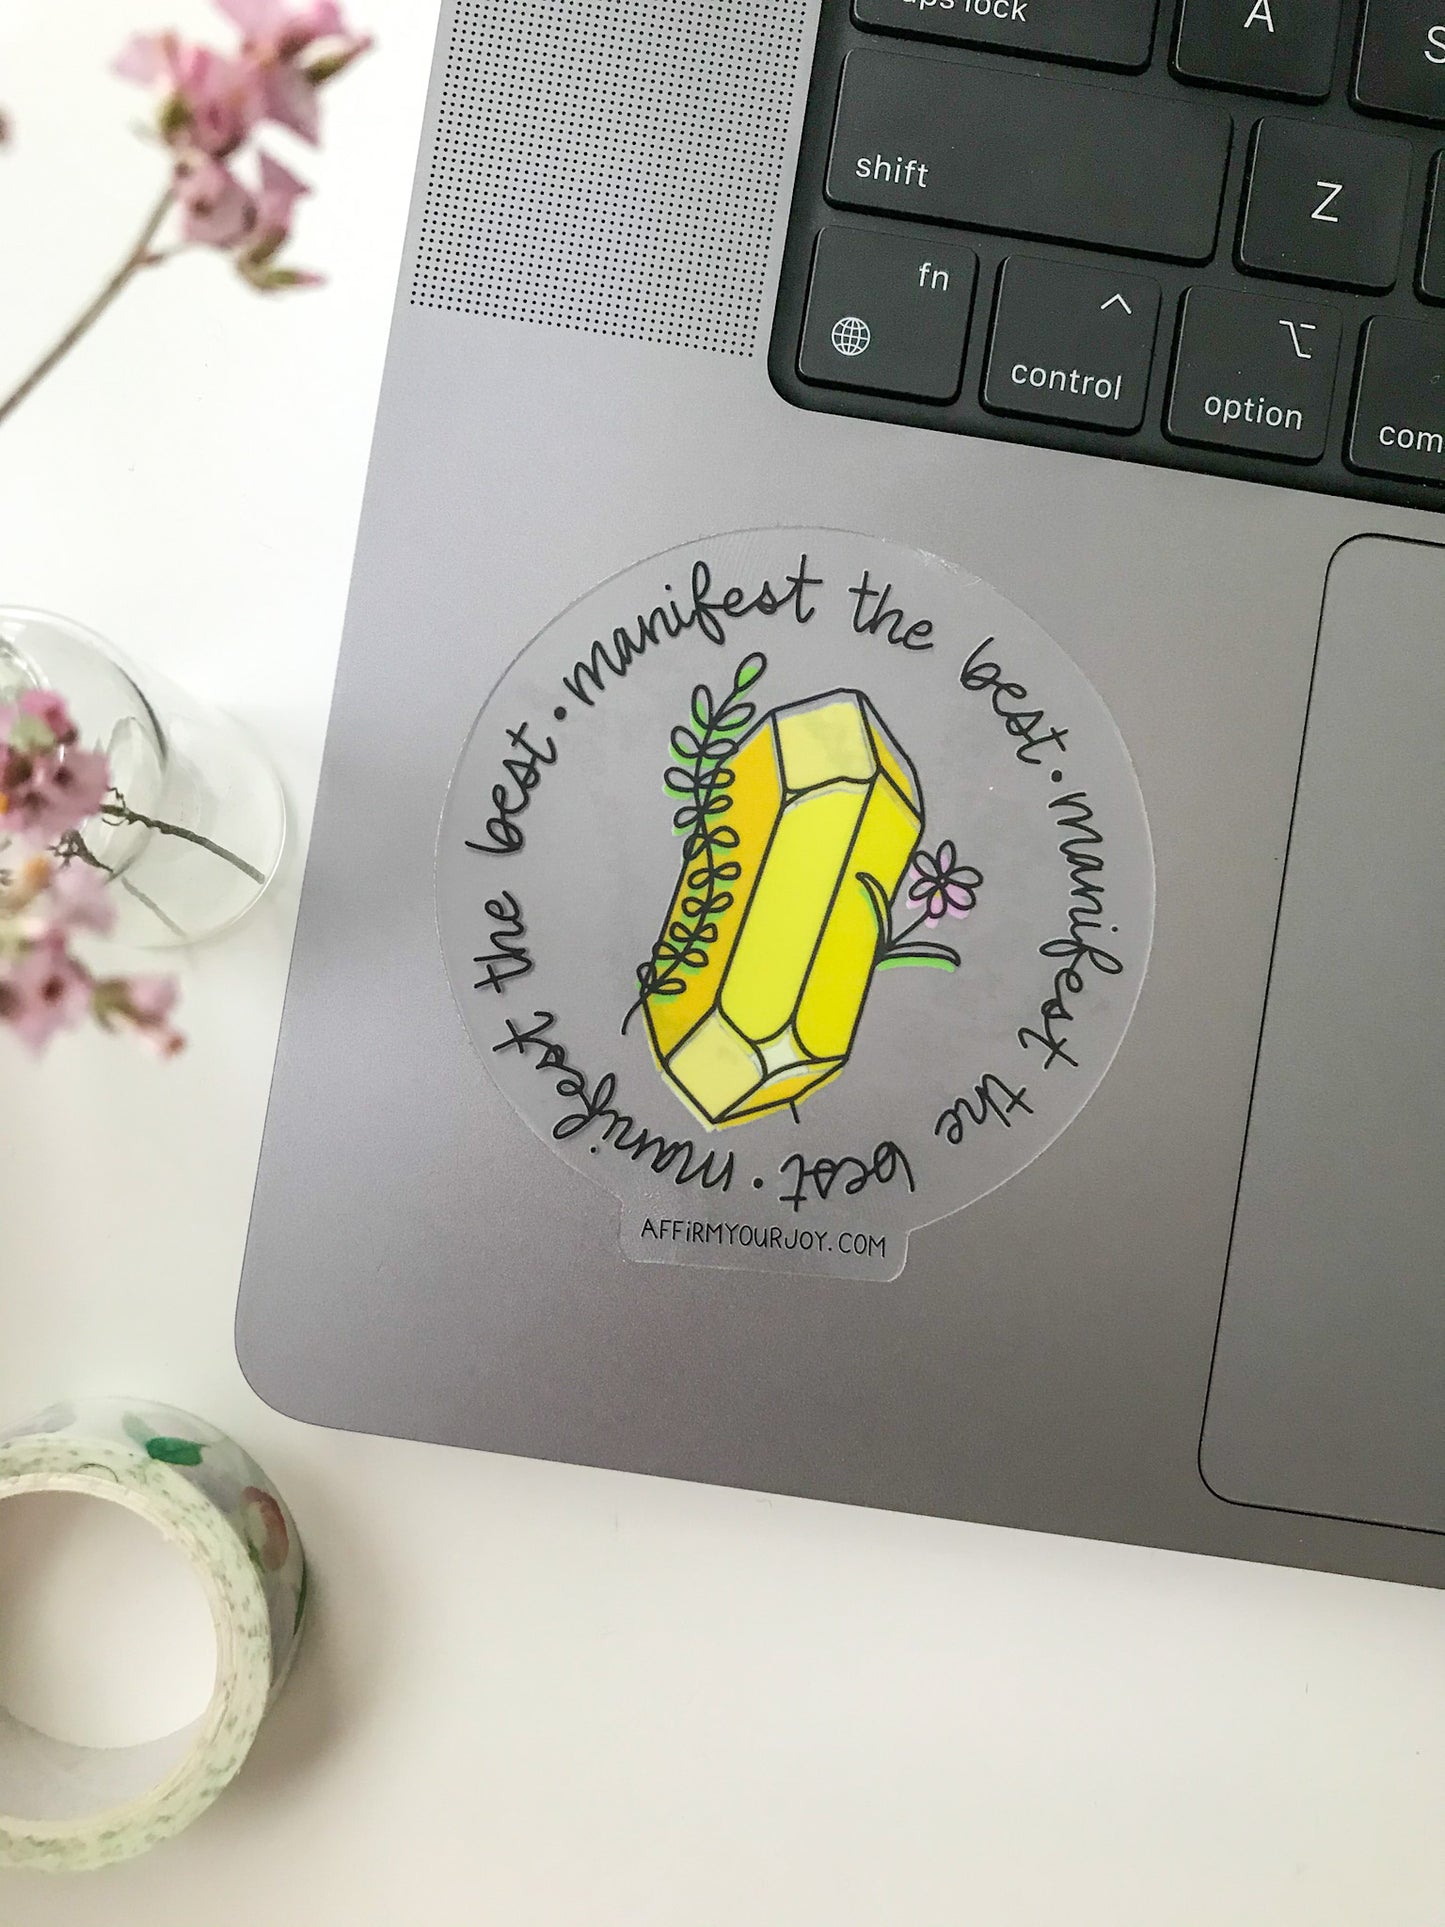 Clear circular sticker with yellow crystal on a laptop